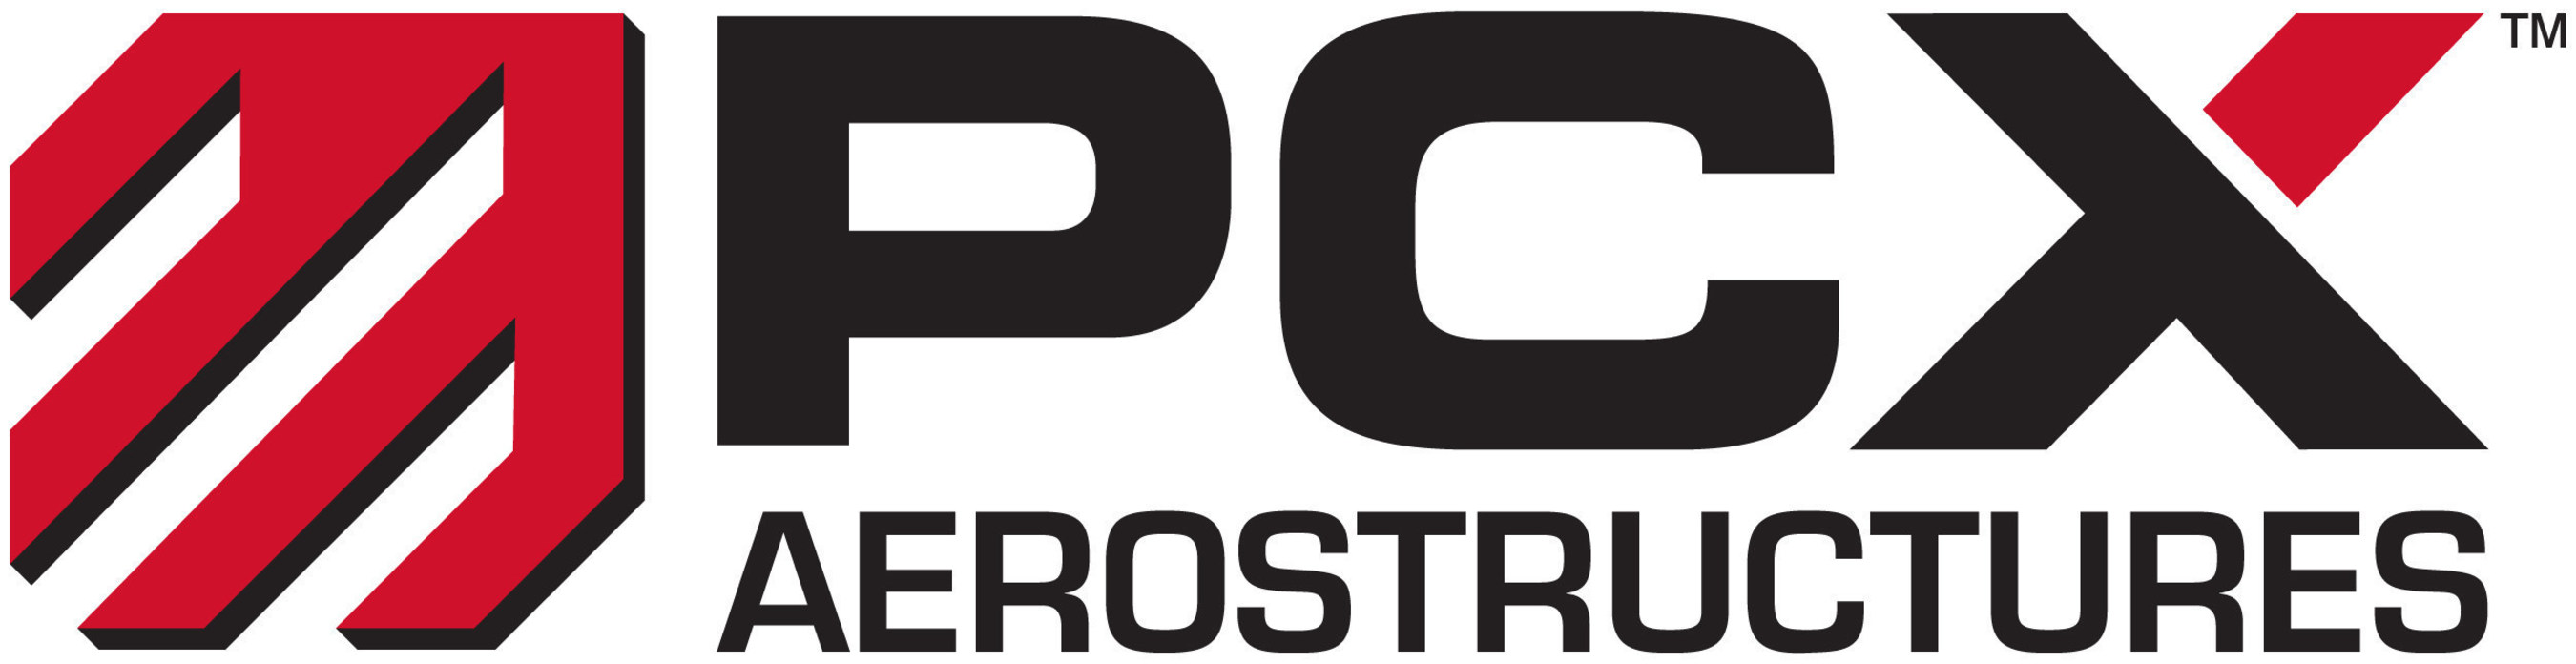 PCX Aerostructures, LLC is a world class supplier of highly engineered, precision, flight critical aerospace components and large, structural assemblies for rotorcraft and fixed wing aerospace platforms. Learn more at pcxaero.com. (PRNewsFoto/PCX Aerostructures, LLC)